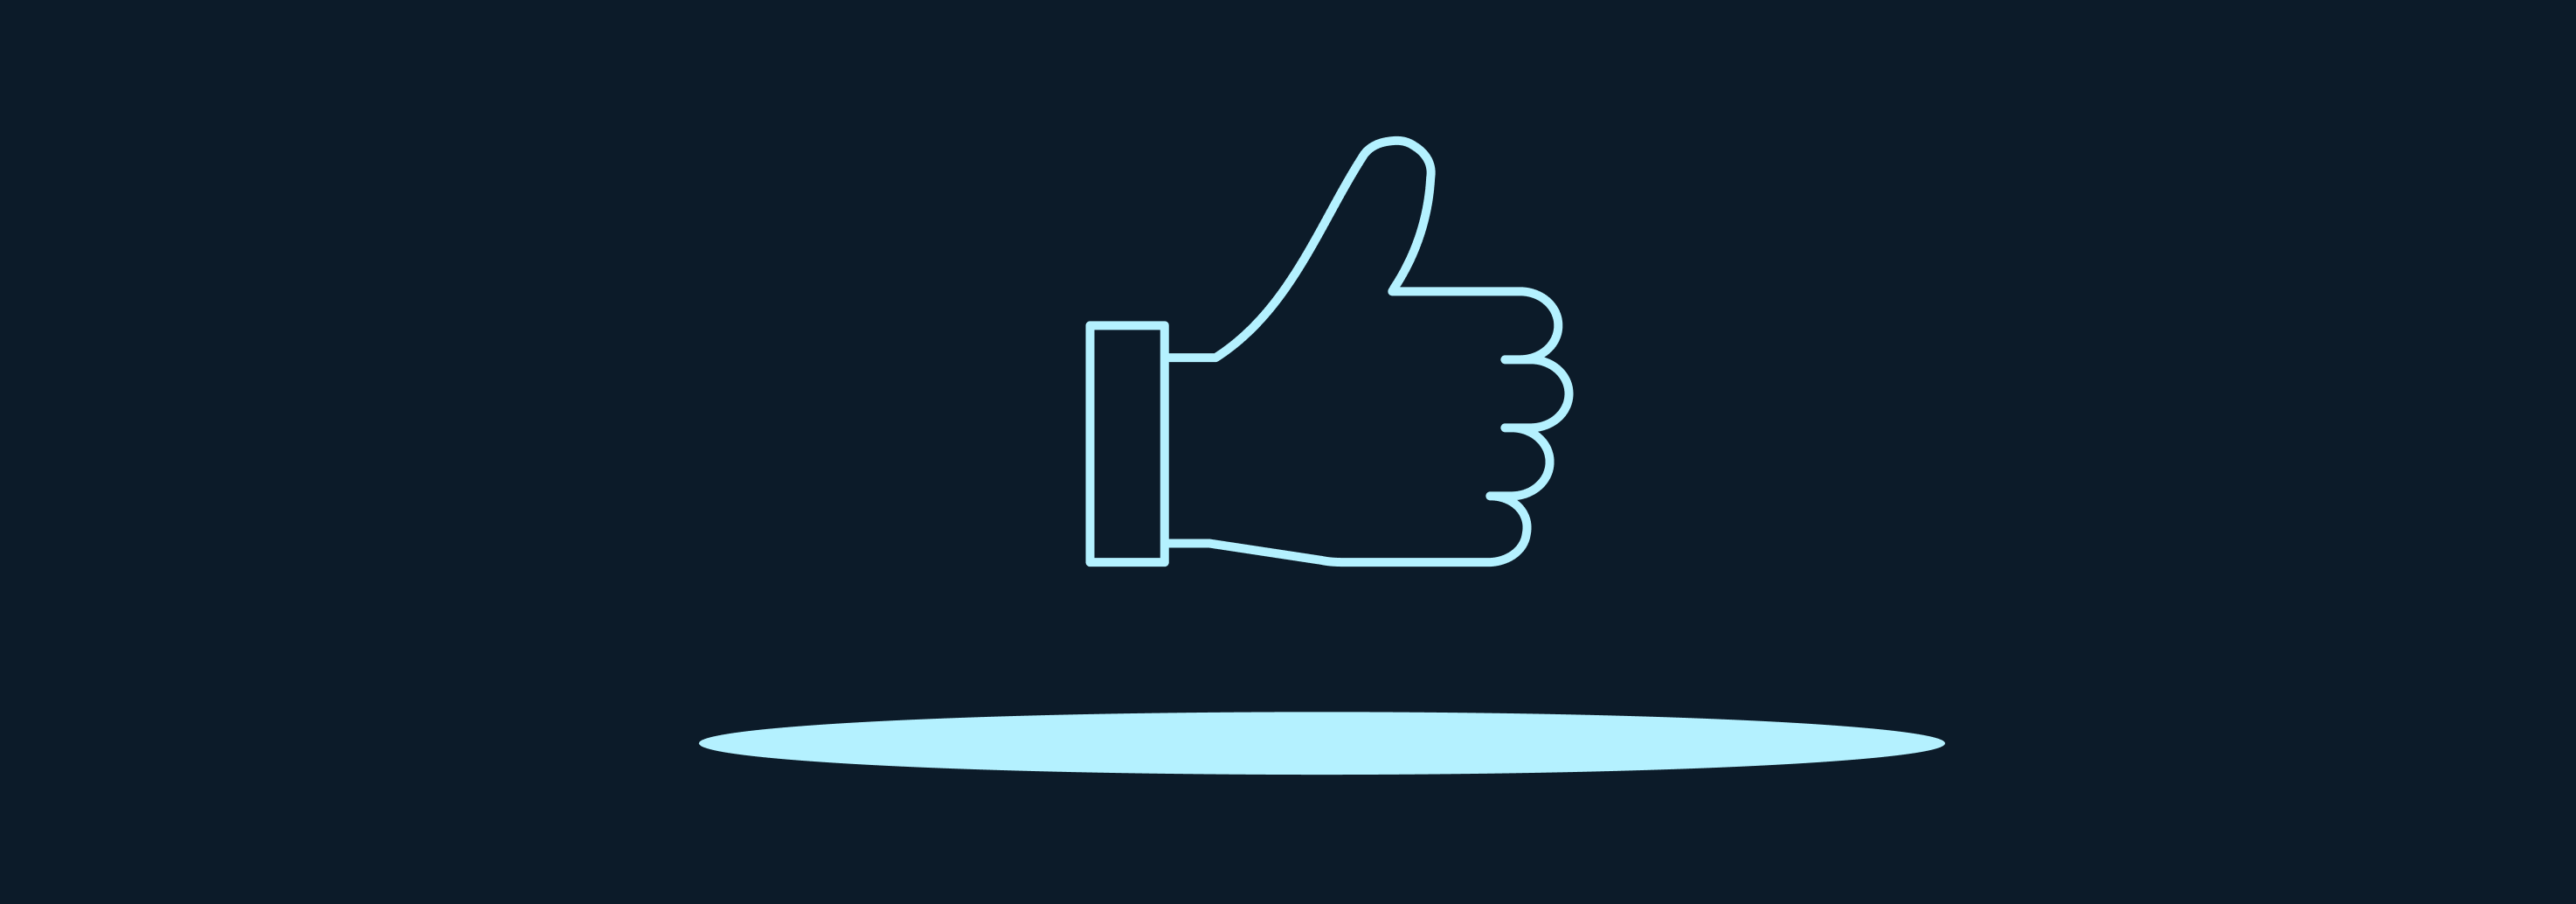 Simple illustration of a thumbs up